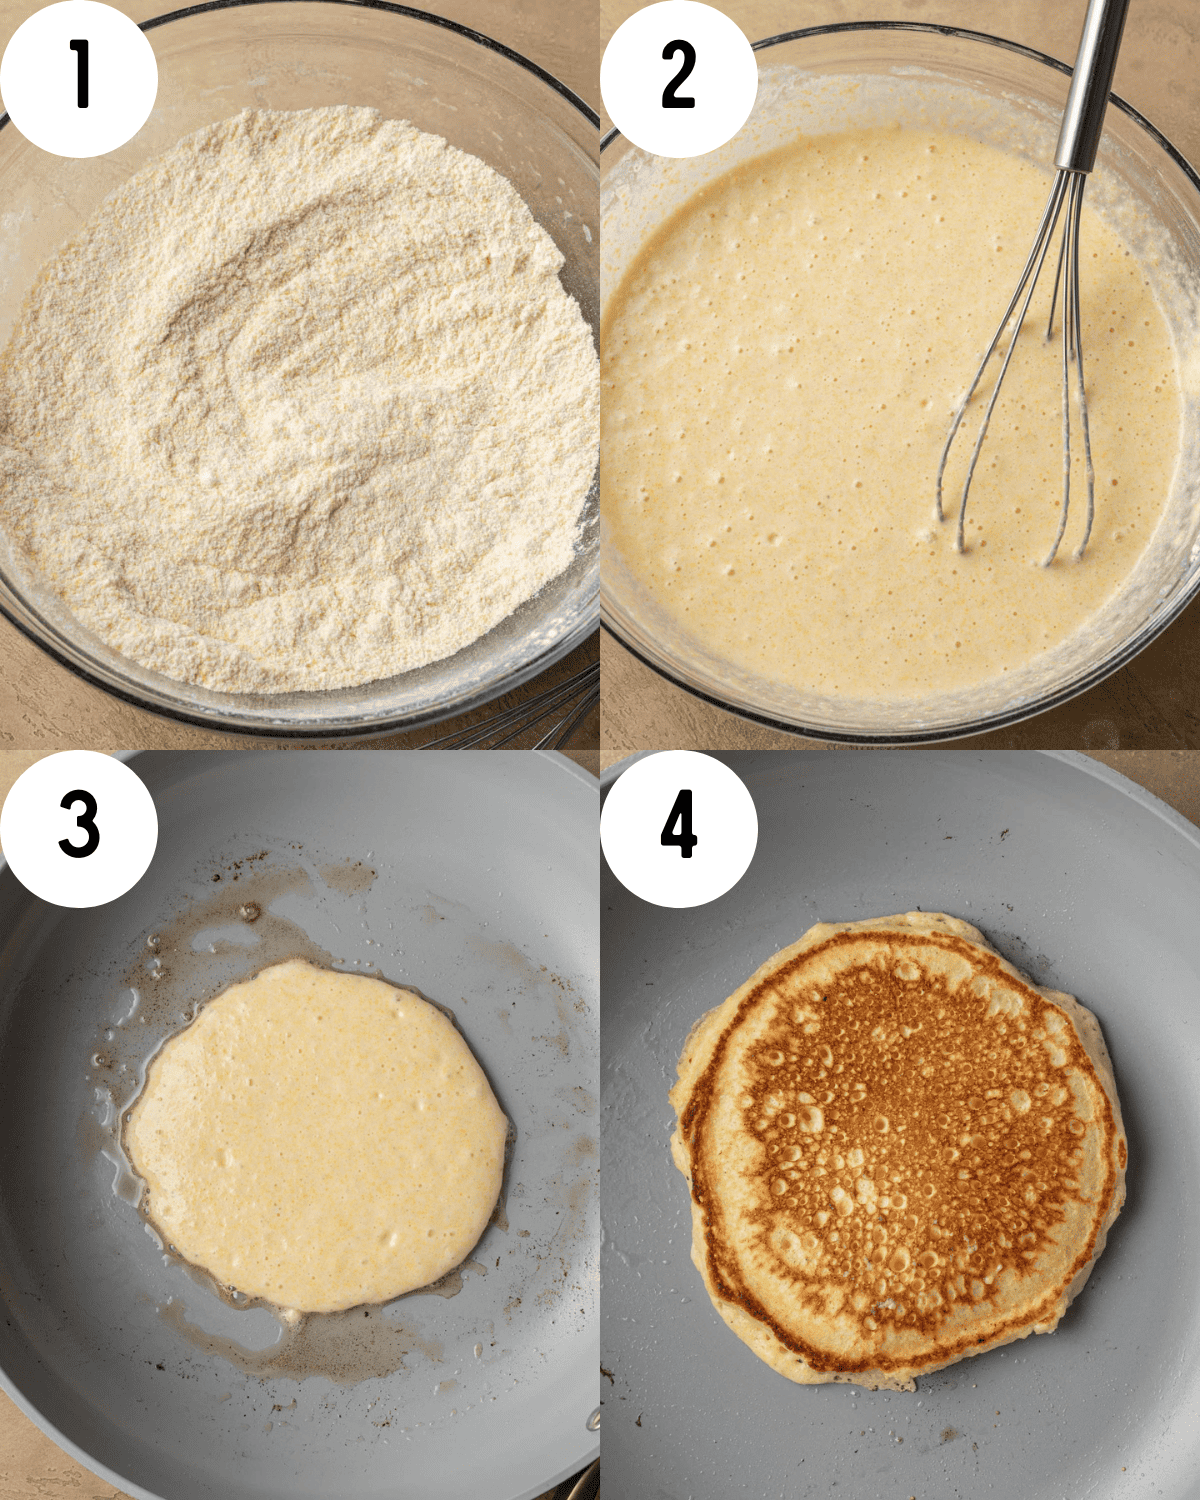 How to make cornbread pancakes. 1. Mix dry ingredients in glass mixing bowl. 2. Add in wet ingredients in glass mixing bowl and stir. 3. Scoop pancake batter into frying pan and cook one side. 4. Flip pancake to cook the other side.